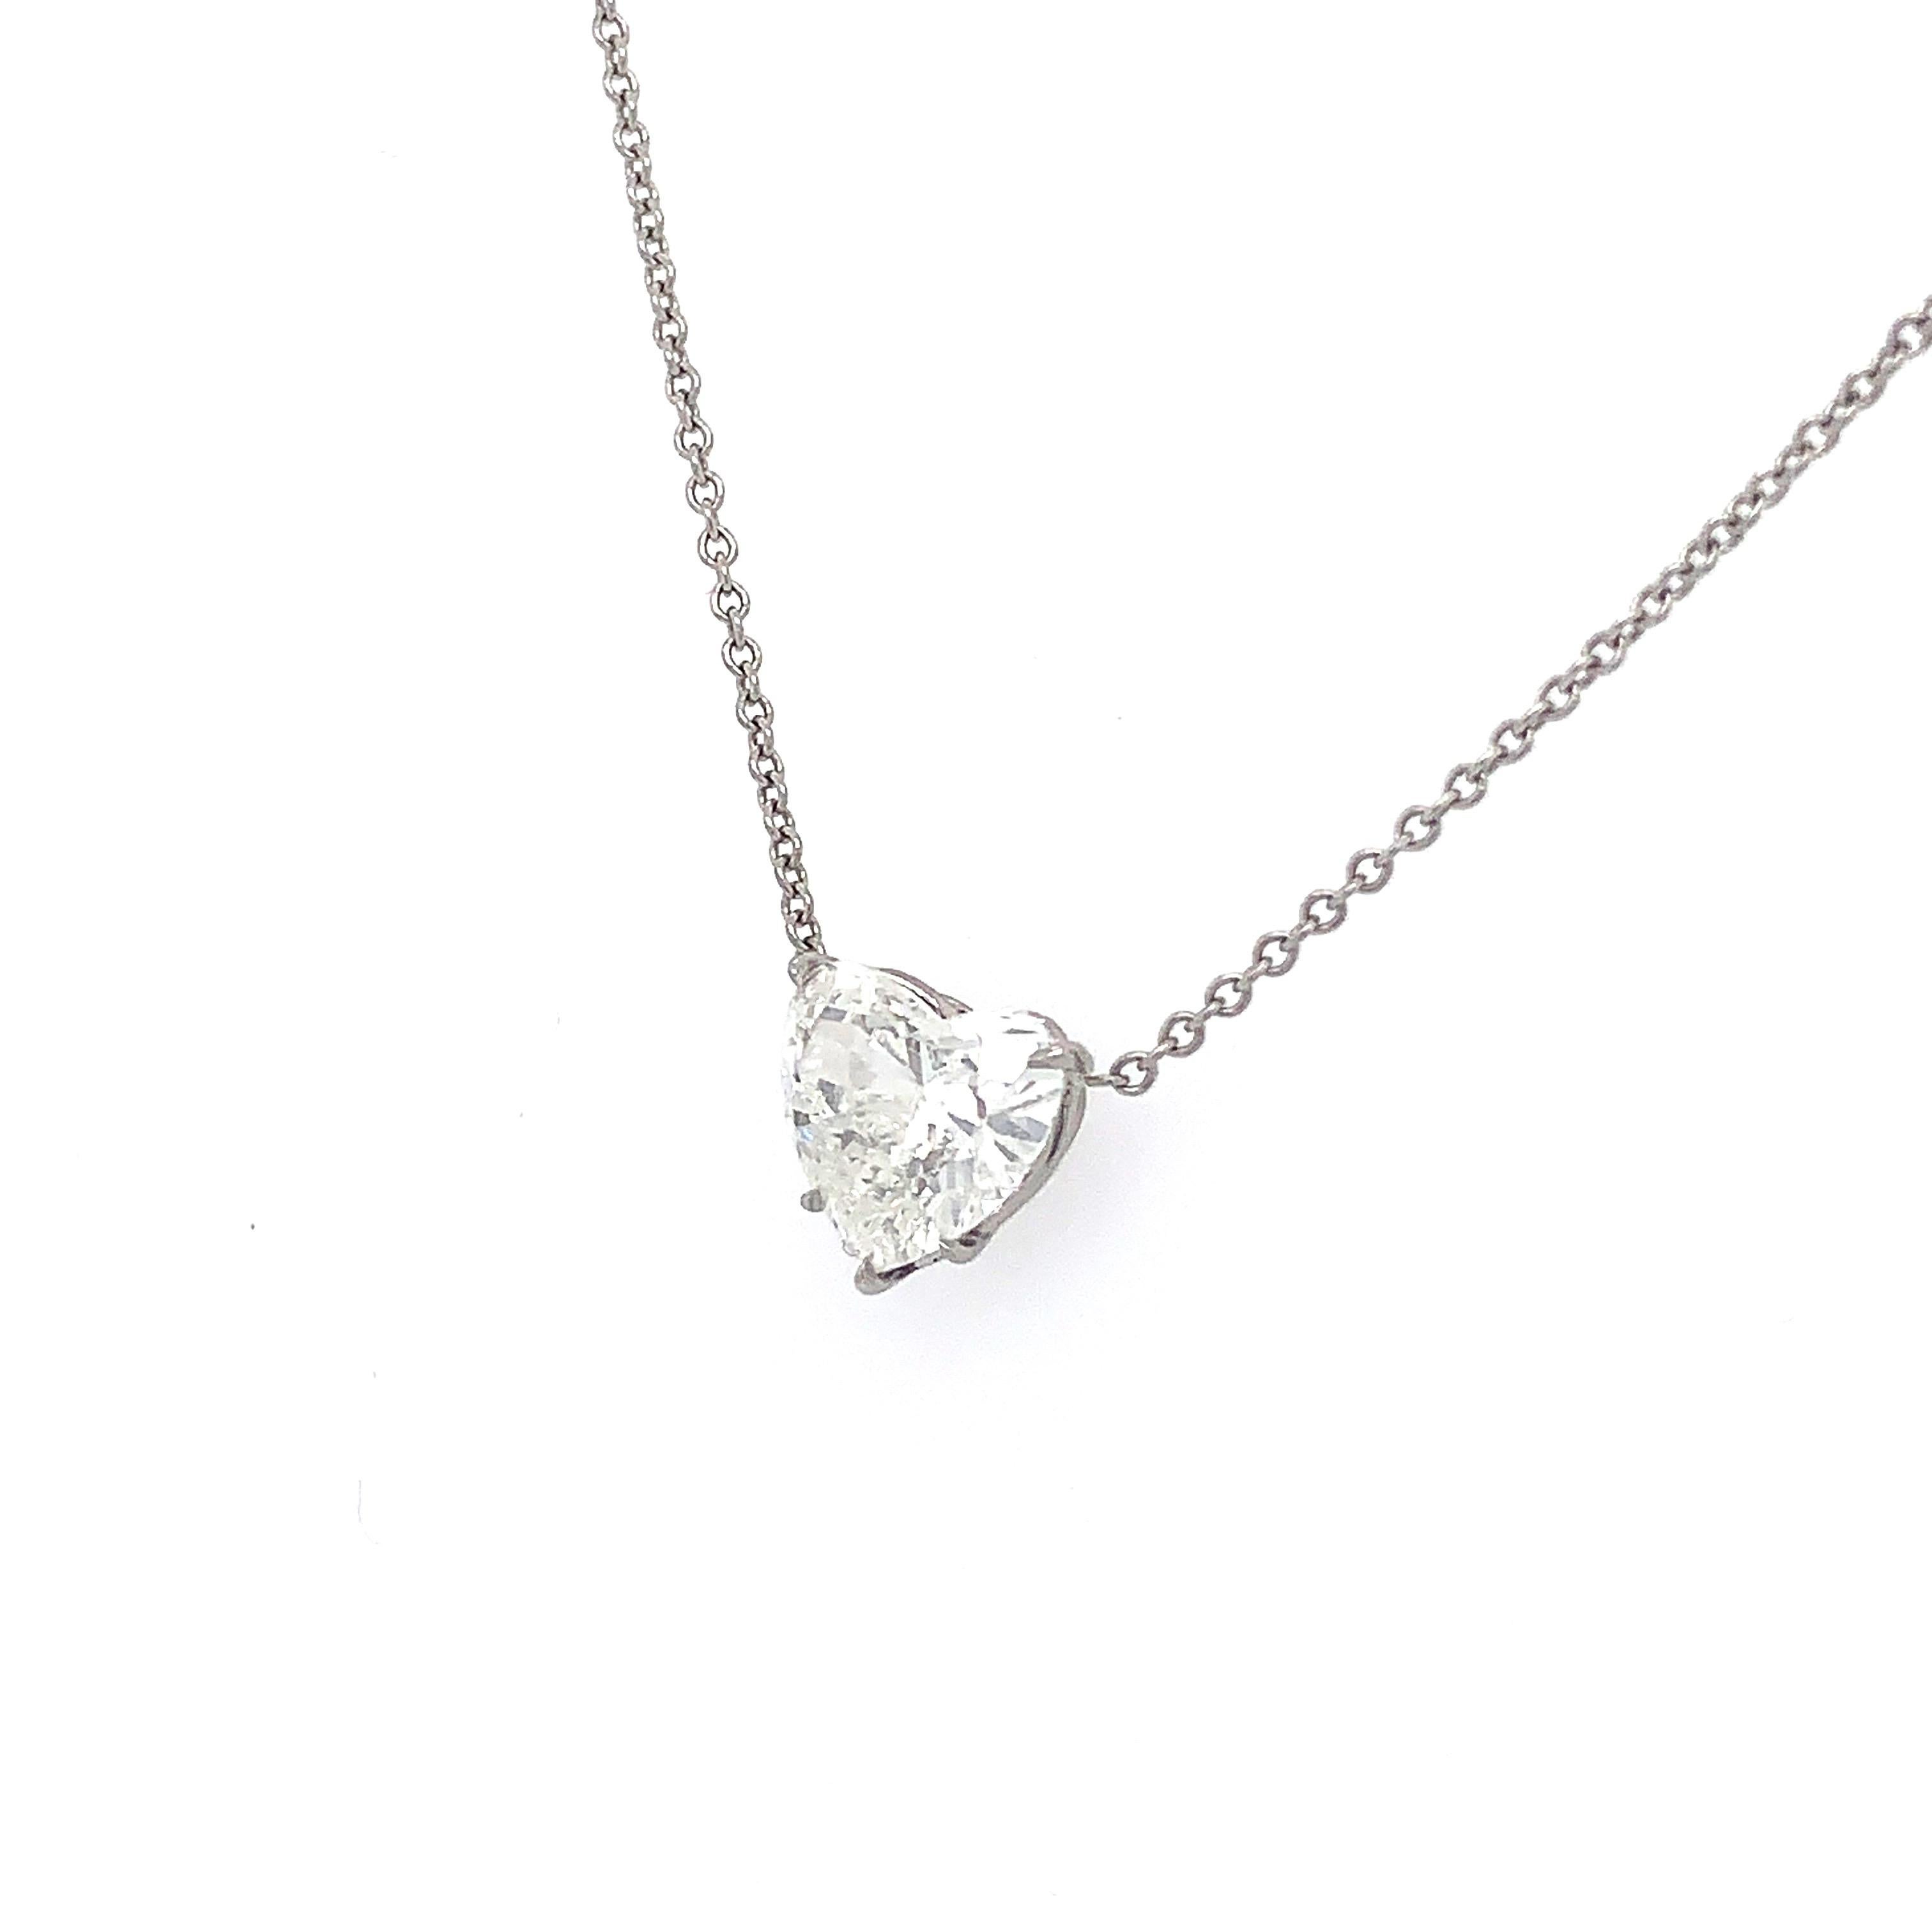 This Big looking pendant from ISSAC NUSSBAUM NEW YORK features a heart shape diamond set in hand made platinum. 
The spectacular diamond is an H color with a very fine white SI1.
Mounted on a delicate platinum chain.
This heart shape pendant